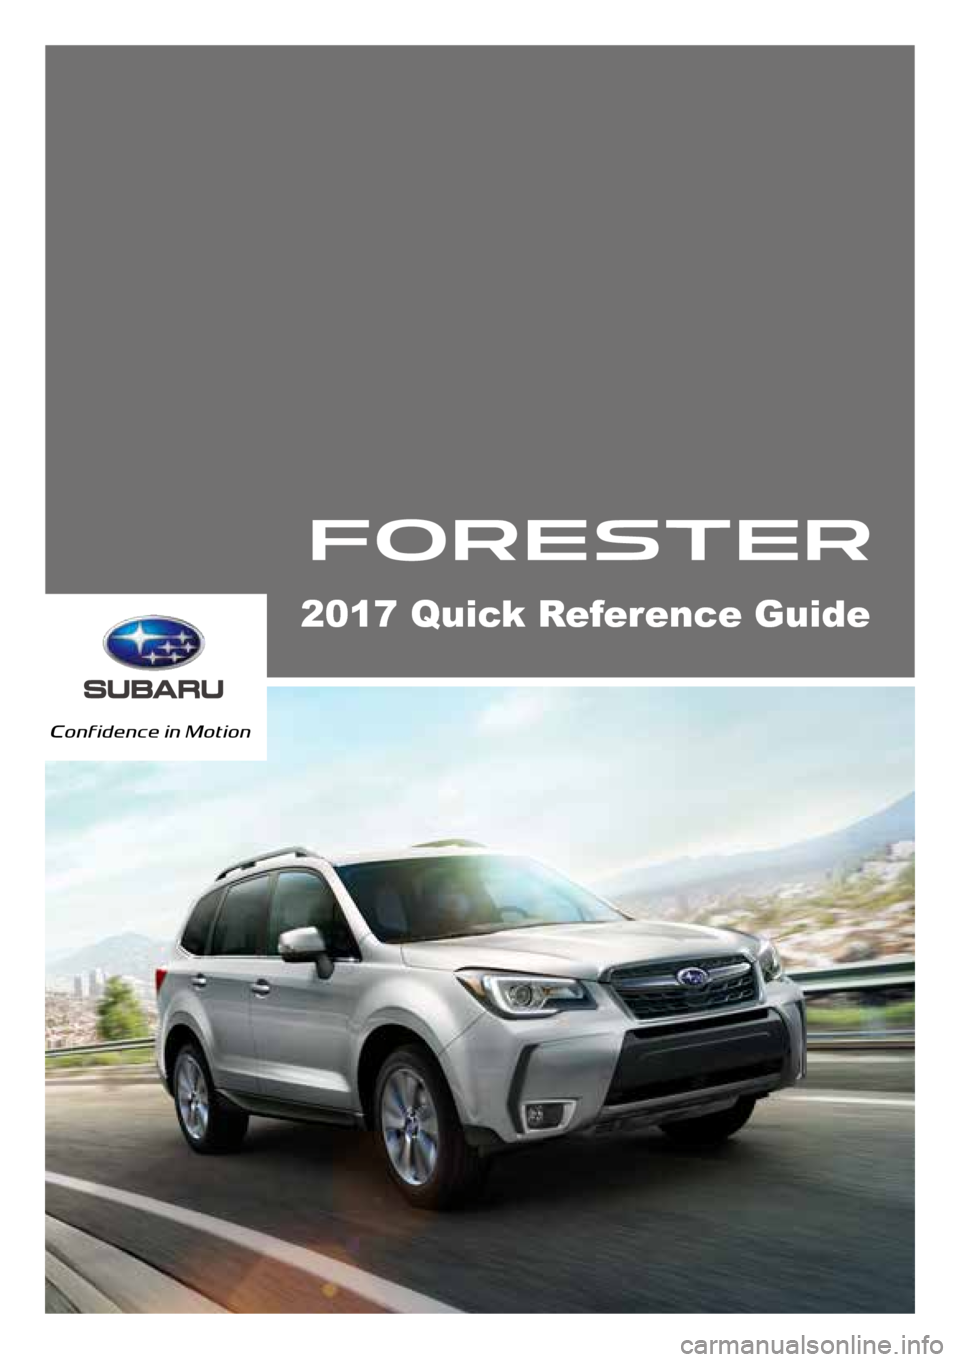 SUBARU FORESTER 2017 SJ / 4.G Quick Reference Guide 